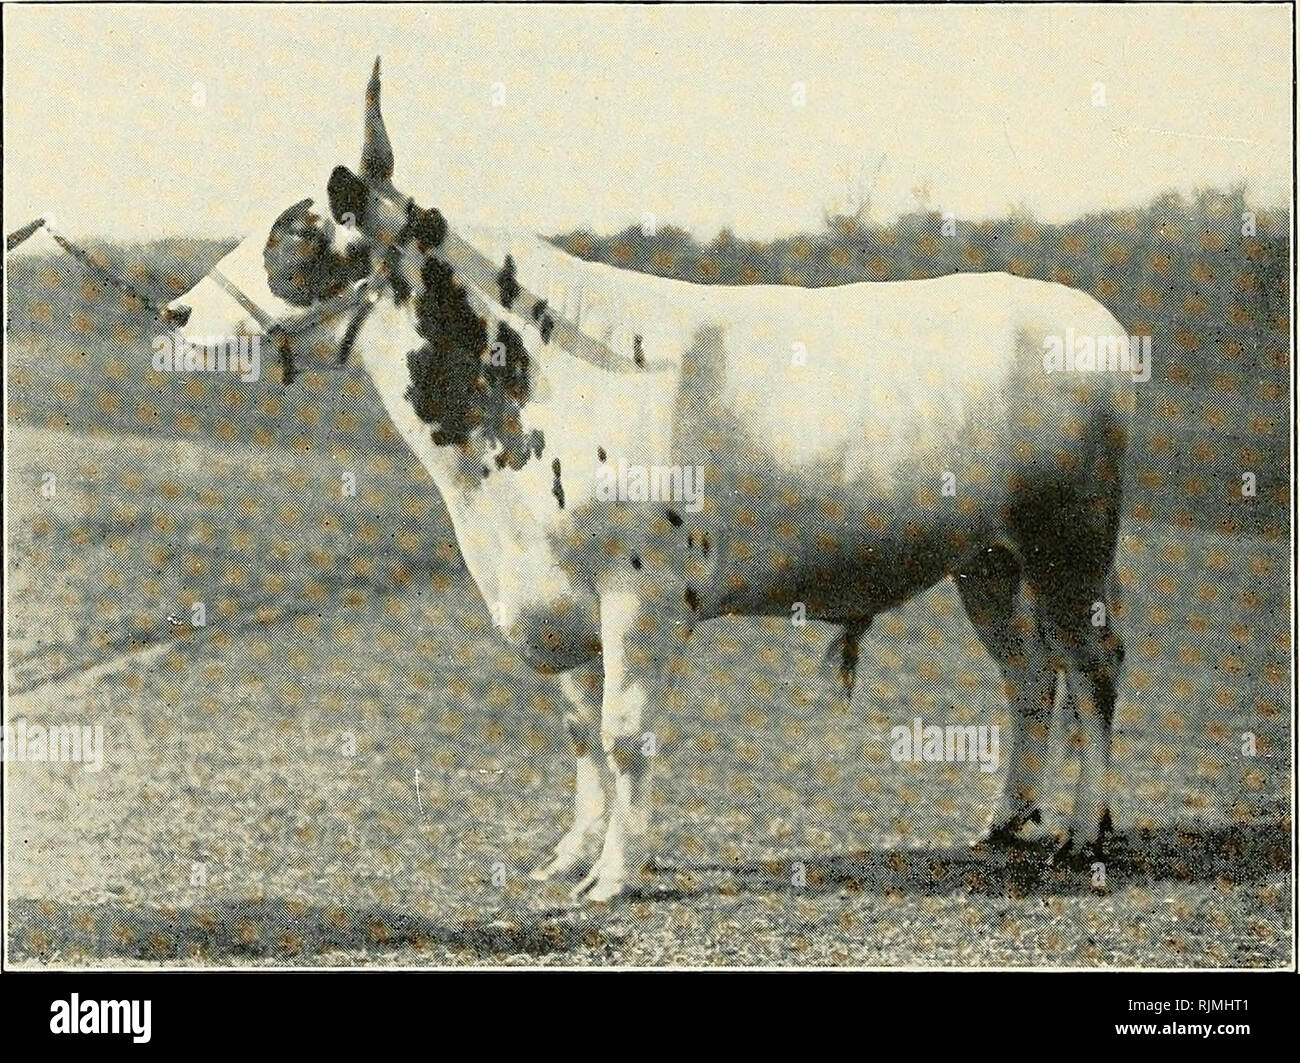 . Ayrshire year book. Ayrshire cattle. 152 FATHERLAND FARM BYFIELD, MASS. F. L. BURKE &amp; SON - - -   Proprietors Herd headed by BARGOWER GOLDEN HORN 15189 Imp. The individual excellence of this bull, backed by the breed- ing on his Sires, through Netherton King Arthur and Bargenoch Durward Lely and the Official Record of 9,206 lbs. of milk from his dam, Bargowan Black Soncie, &quot;24177,&quot; and 10,063 lbs. of milk from his paternal grand dam, Craighead Cherry Dewdrop 3d, &quot;18121,&quot; should make his get from the Fatherland importa- tion second to none, both as show cows and high p Stock Photo